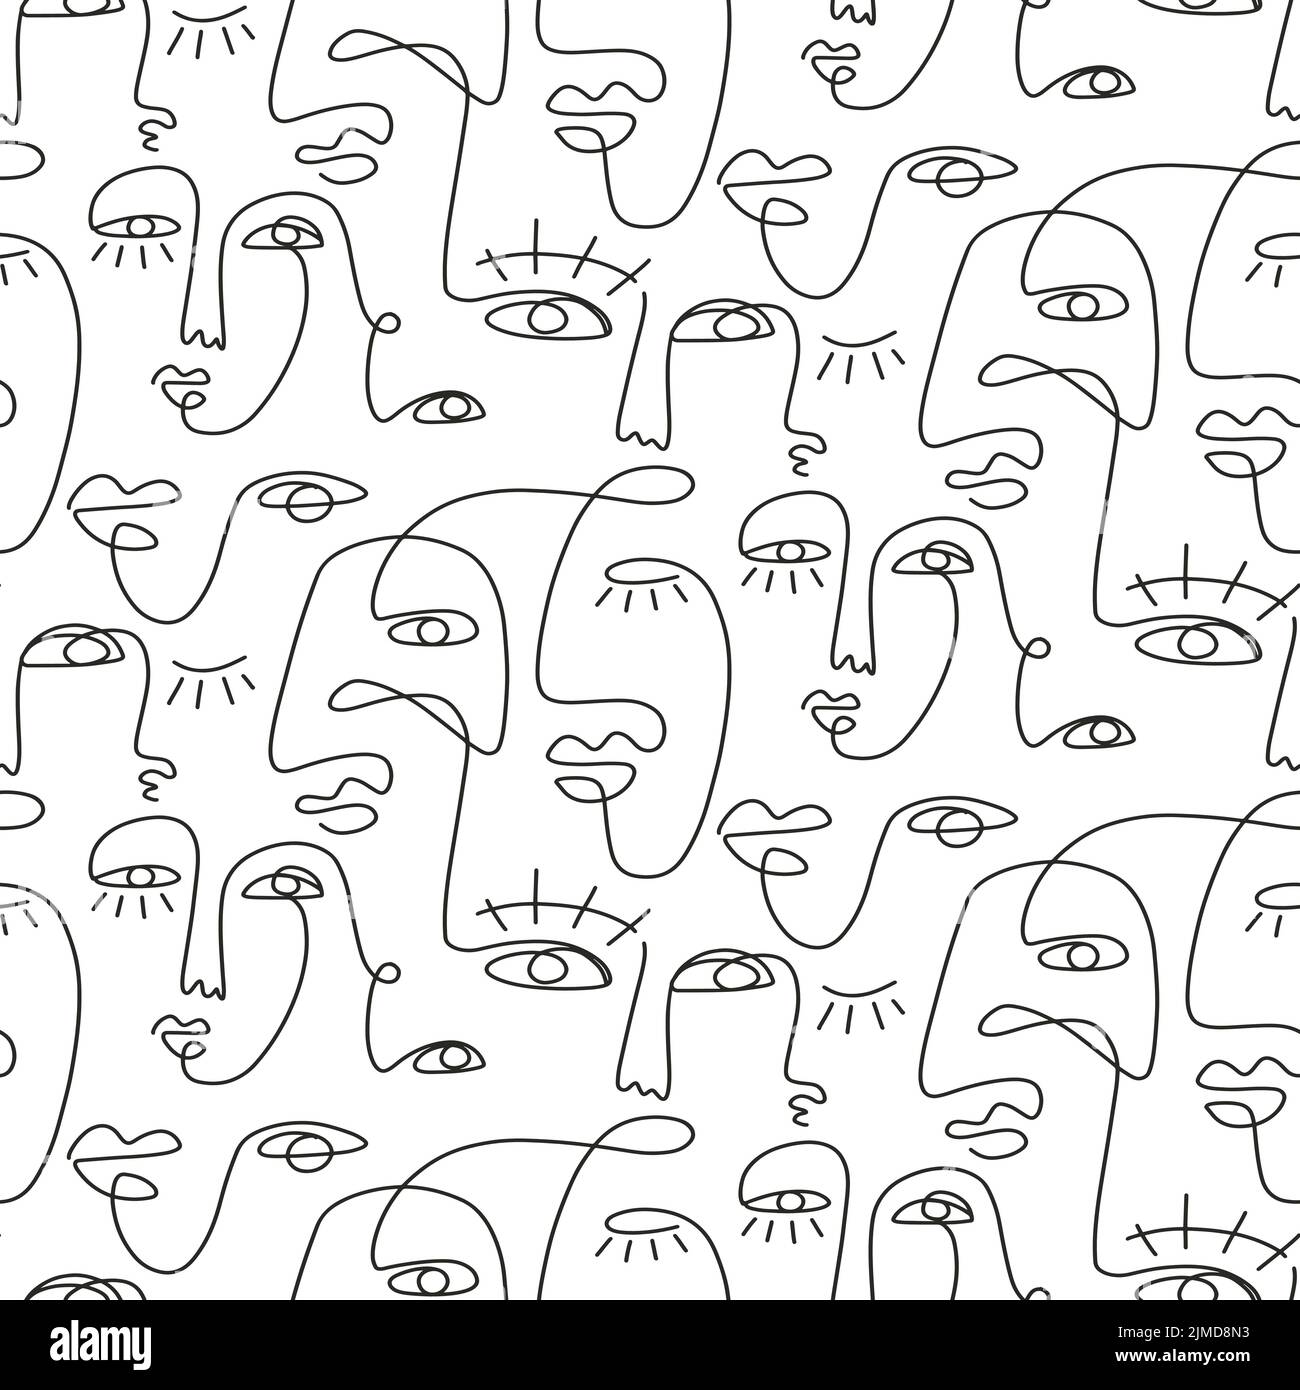 One line drawing abstract face seamless pattern Stock Vector